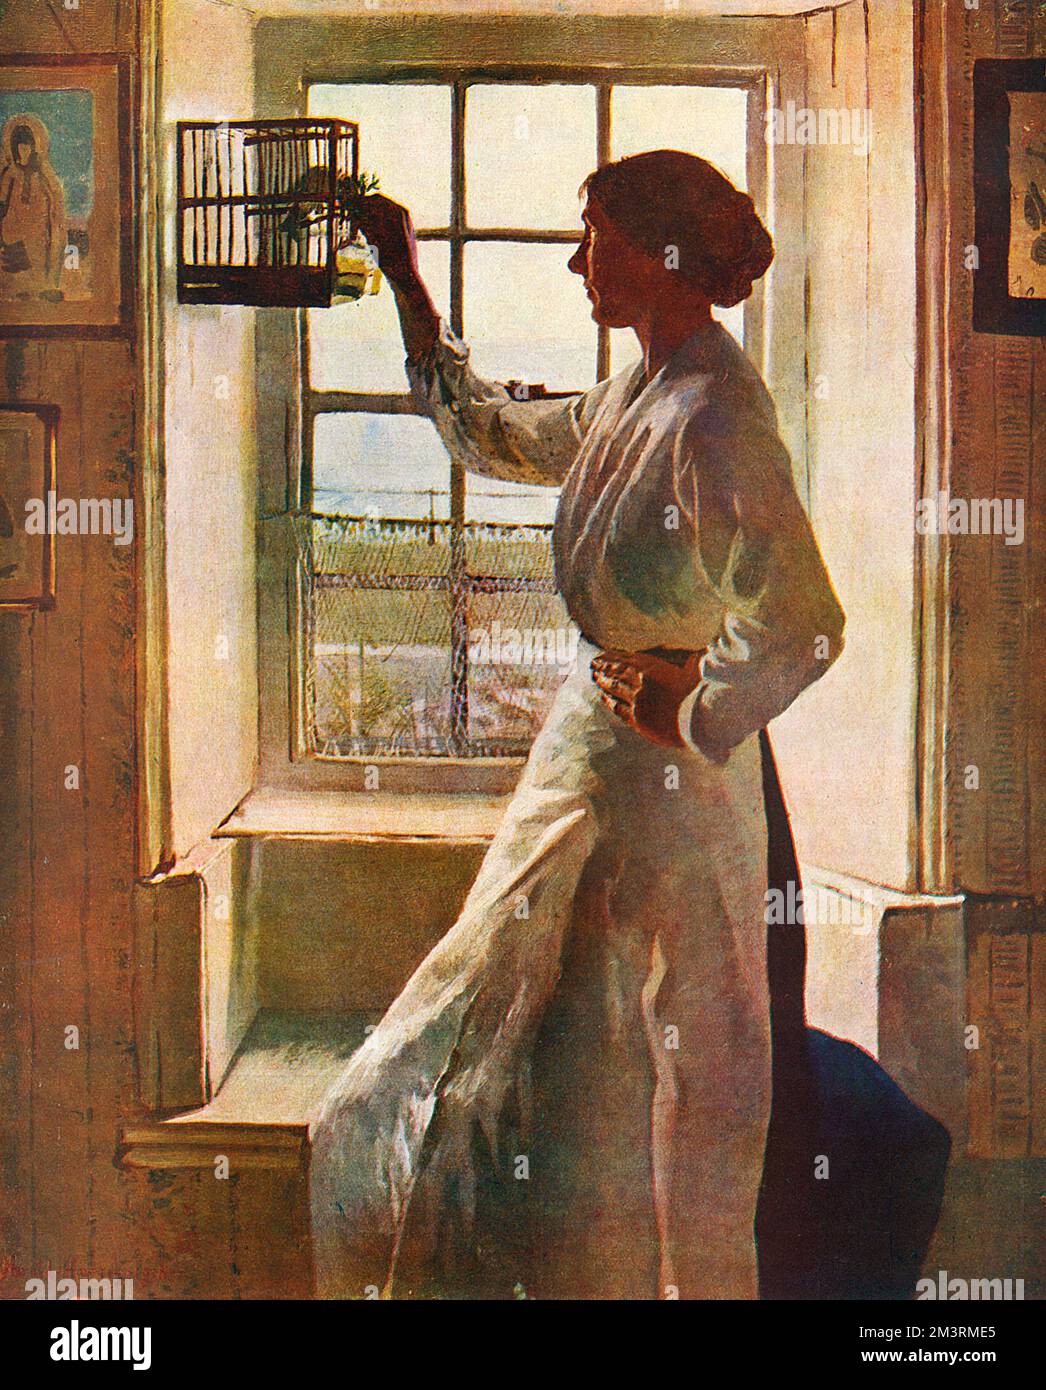 The Cottage Window by Harold Harvey (1874-1941), one of the Newlyn School of Painters, showing a woman feeding a small bird in a cage by a cottage window.       Date: 1919 Stock Photo